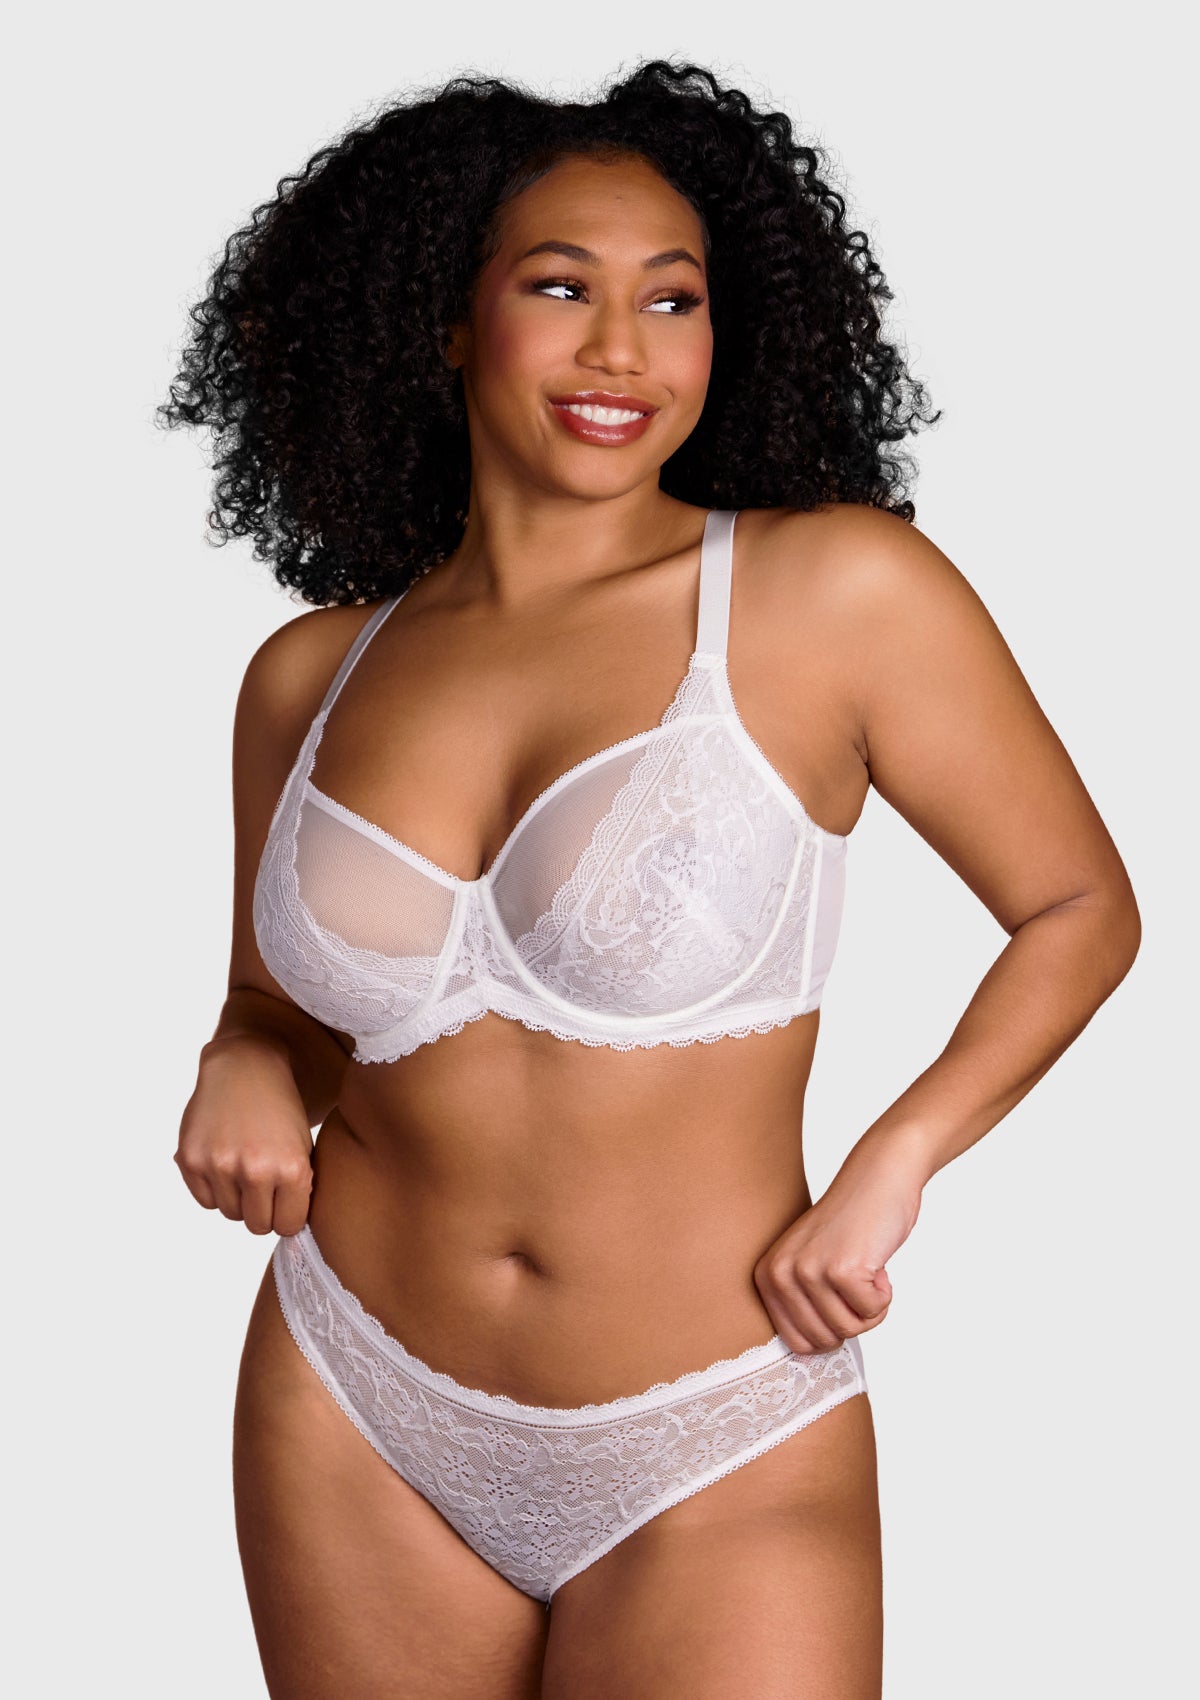 HSIA Anemone Big Bra: Best Bra For Lift And Support, Floral Bra - Light Blue / 40 / DD/E